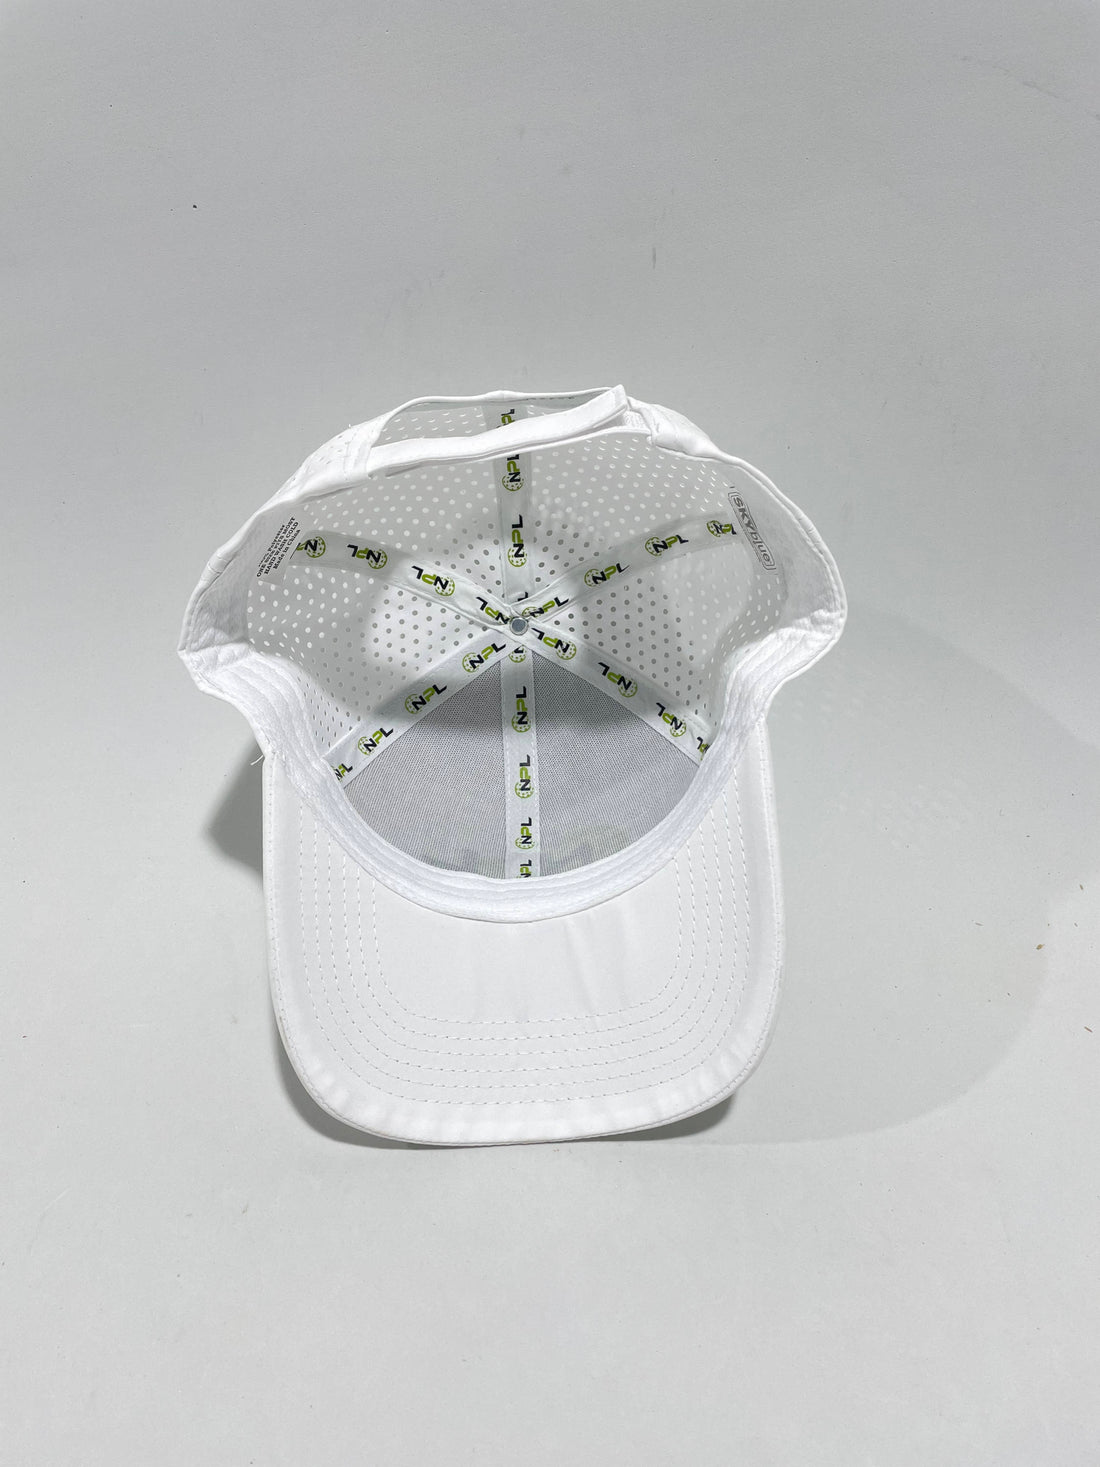 Naples JBB United Premium Performance Hat - New - Reinforced Front Panel - Embroidered Logo - White